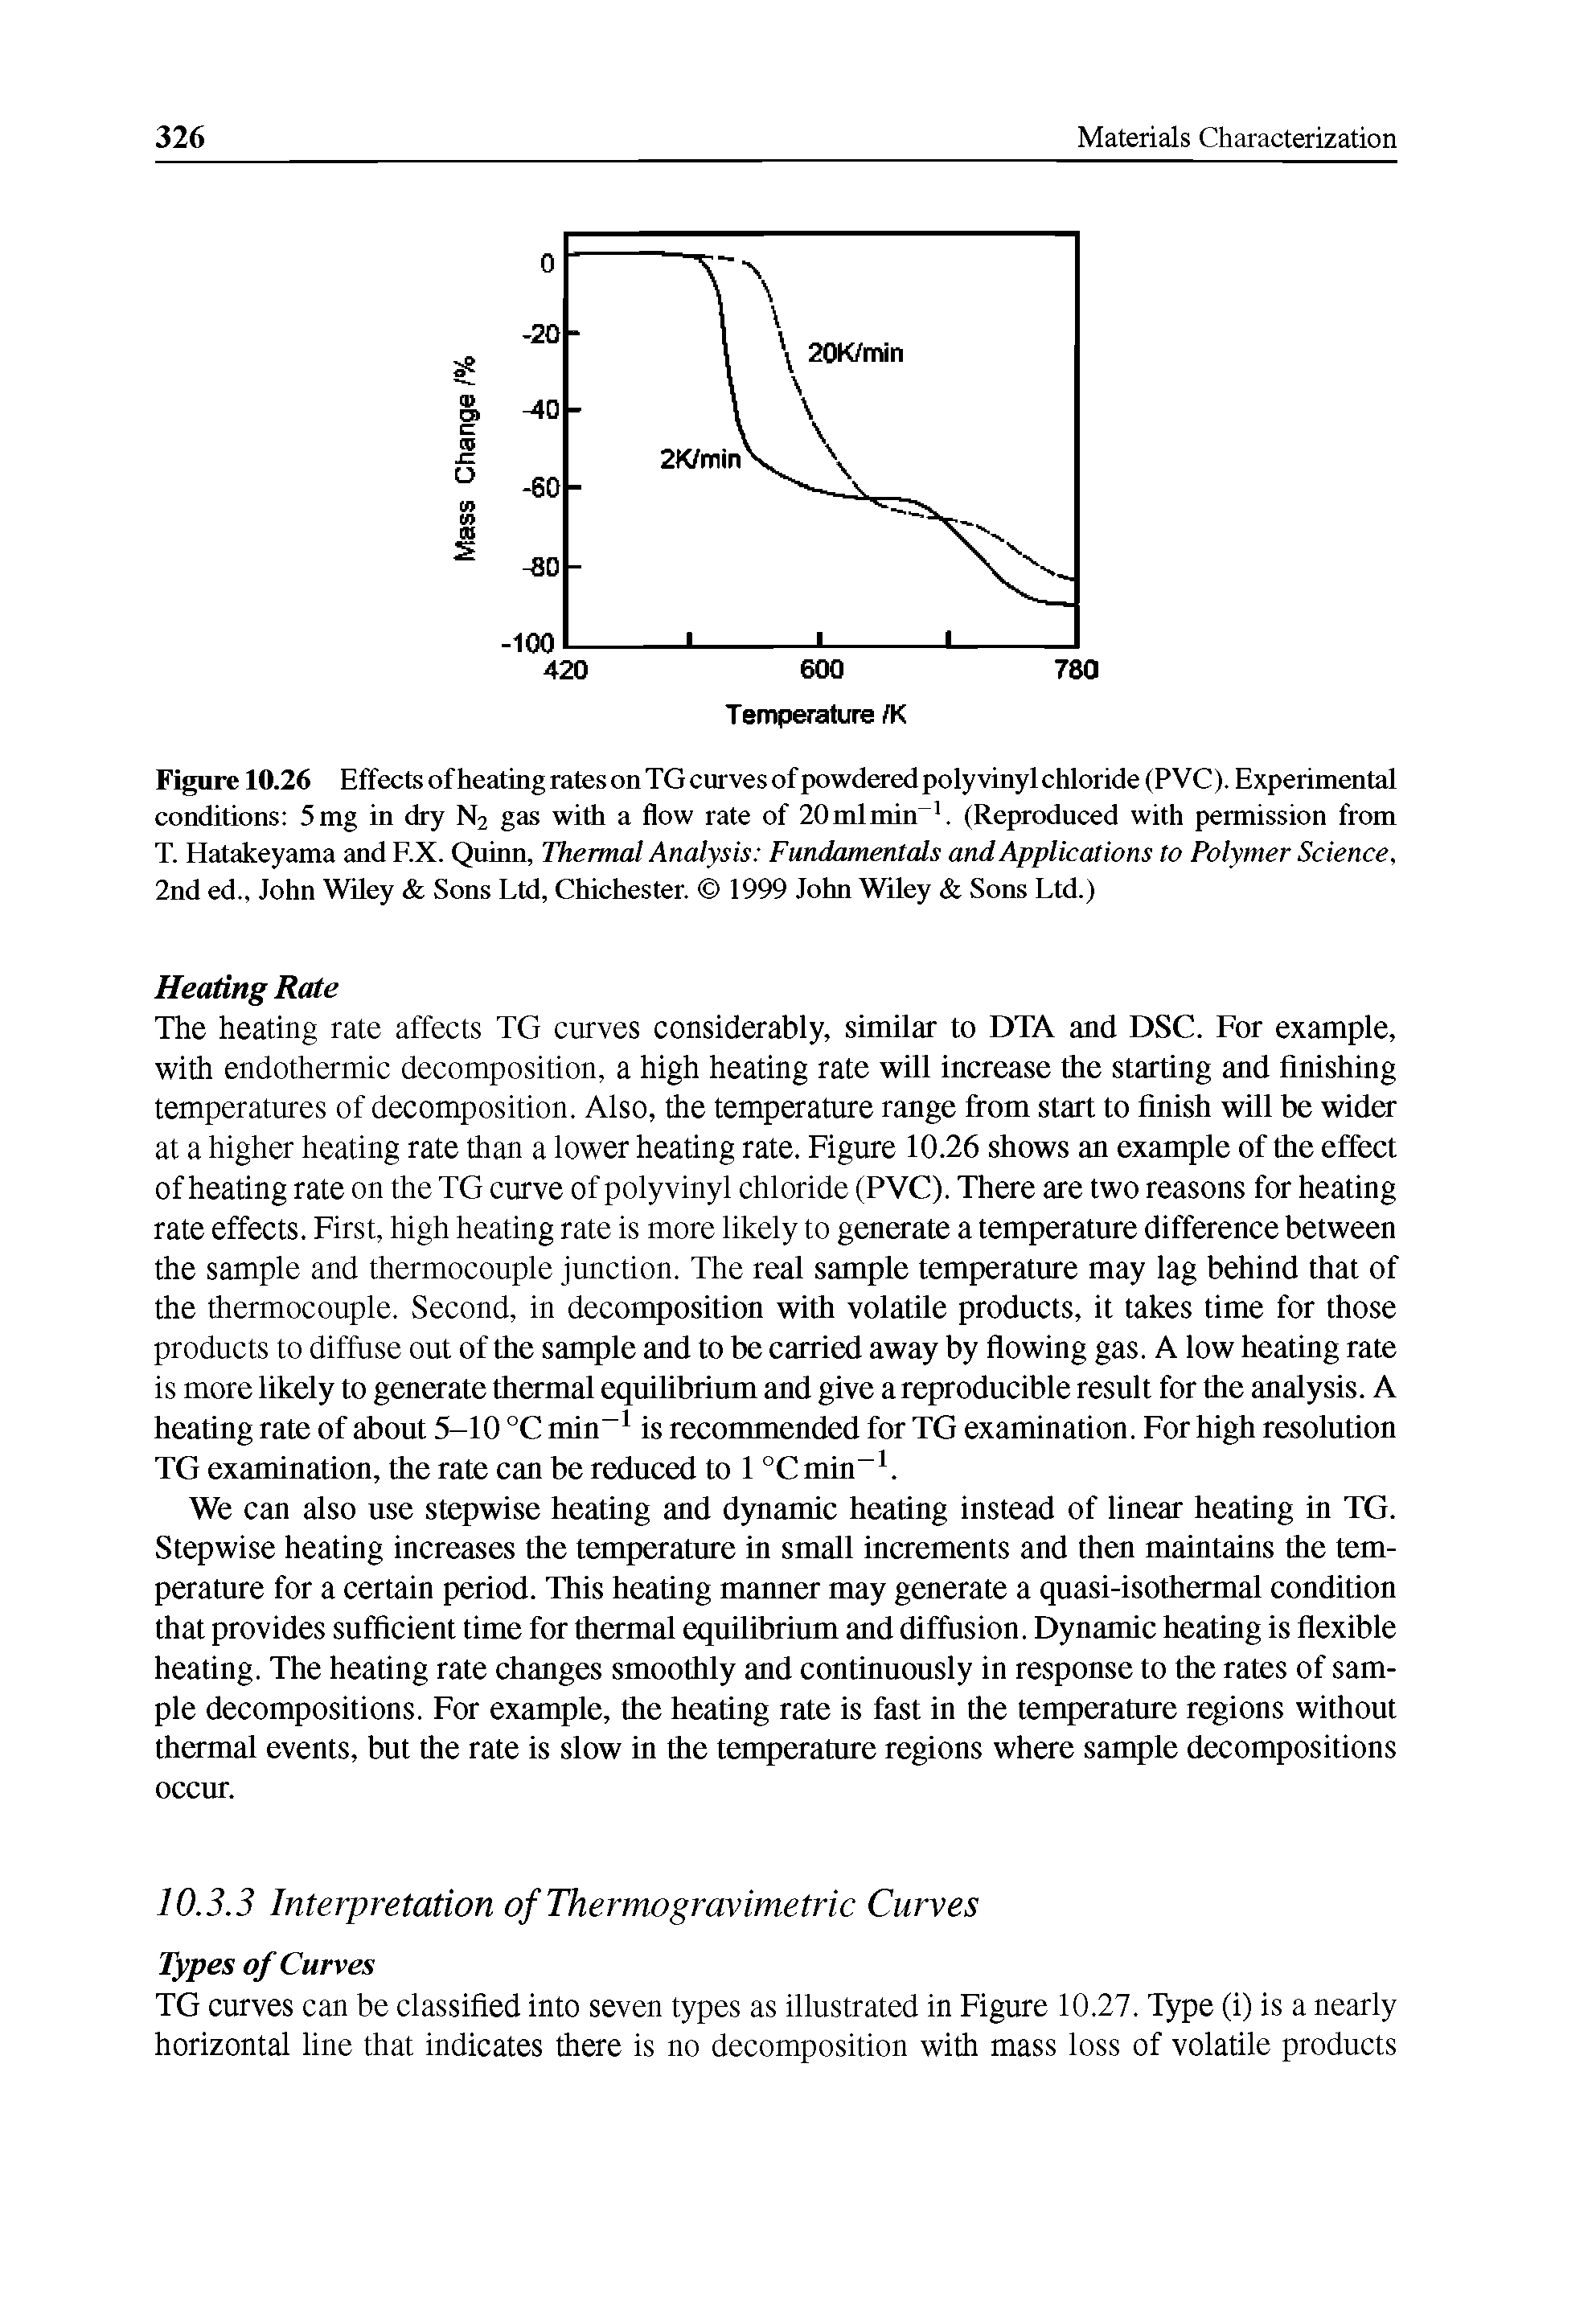 Figure 10.26 Effects of heating rates on TG curves of powdered polyvinyl chloride (PVC). Experimental conditions 5mg in dry N2 gas with a flow rate of 20 ml min. (Reproduced with permission from T. Hatakeyama and F.X. Quinn, Thermal Analysis Fundamentals and Applications to Polymer Science, 2nd ed., John Wiley Sons Ltd, Chichester. 1999 John Wiley Sons Ltd.)...